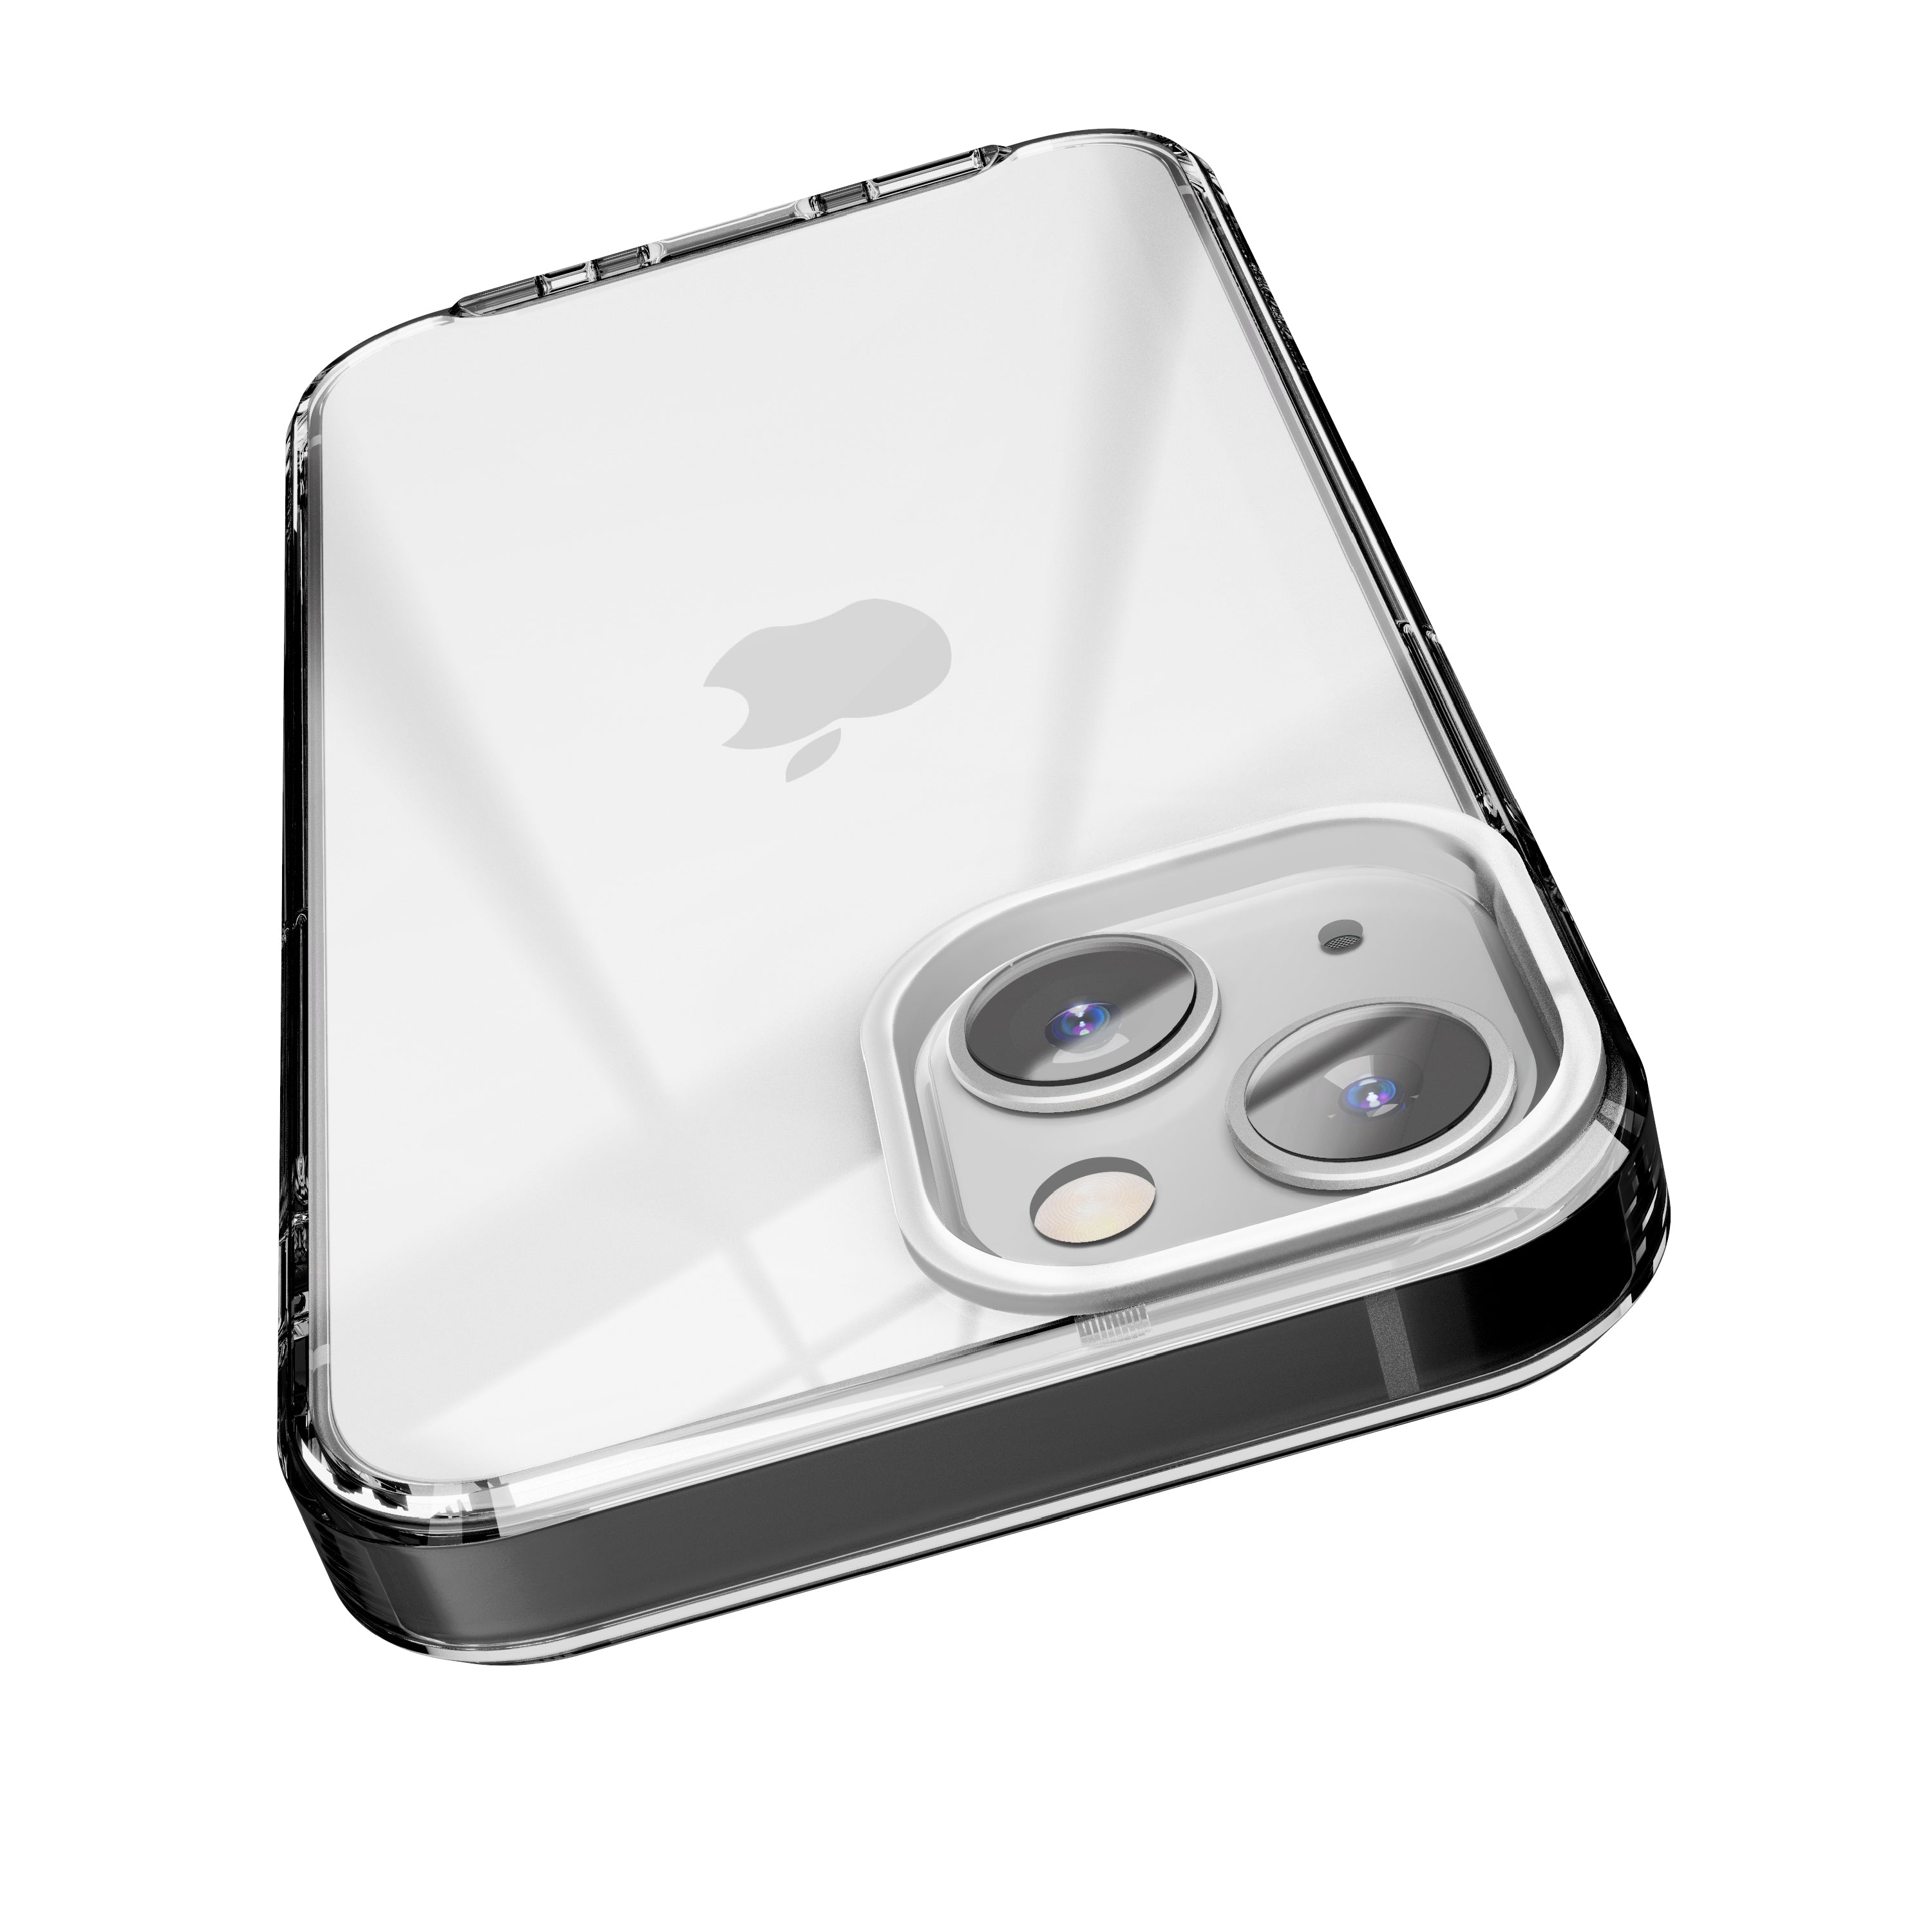 Hybrid Clear Case [3 Colors]